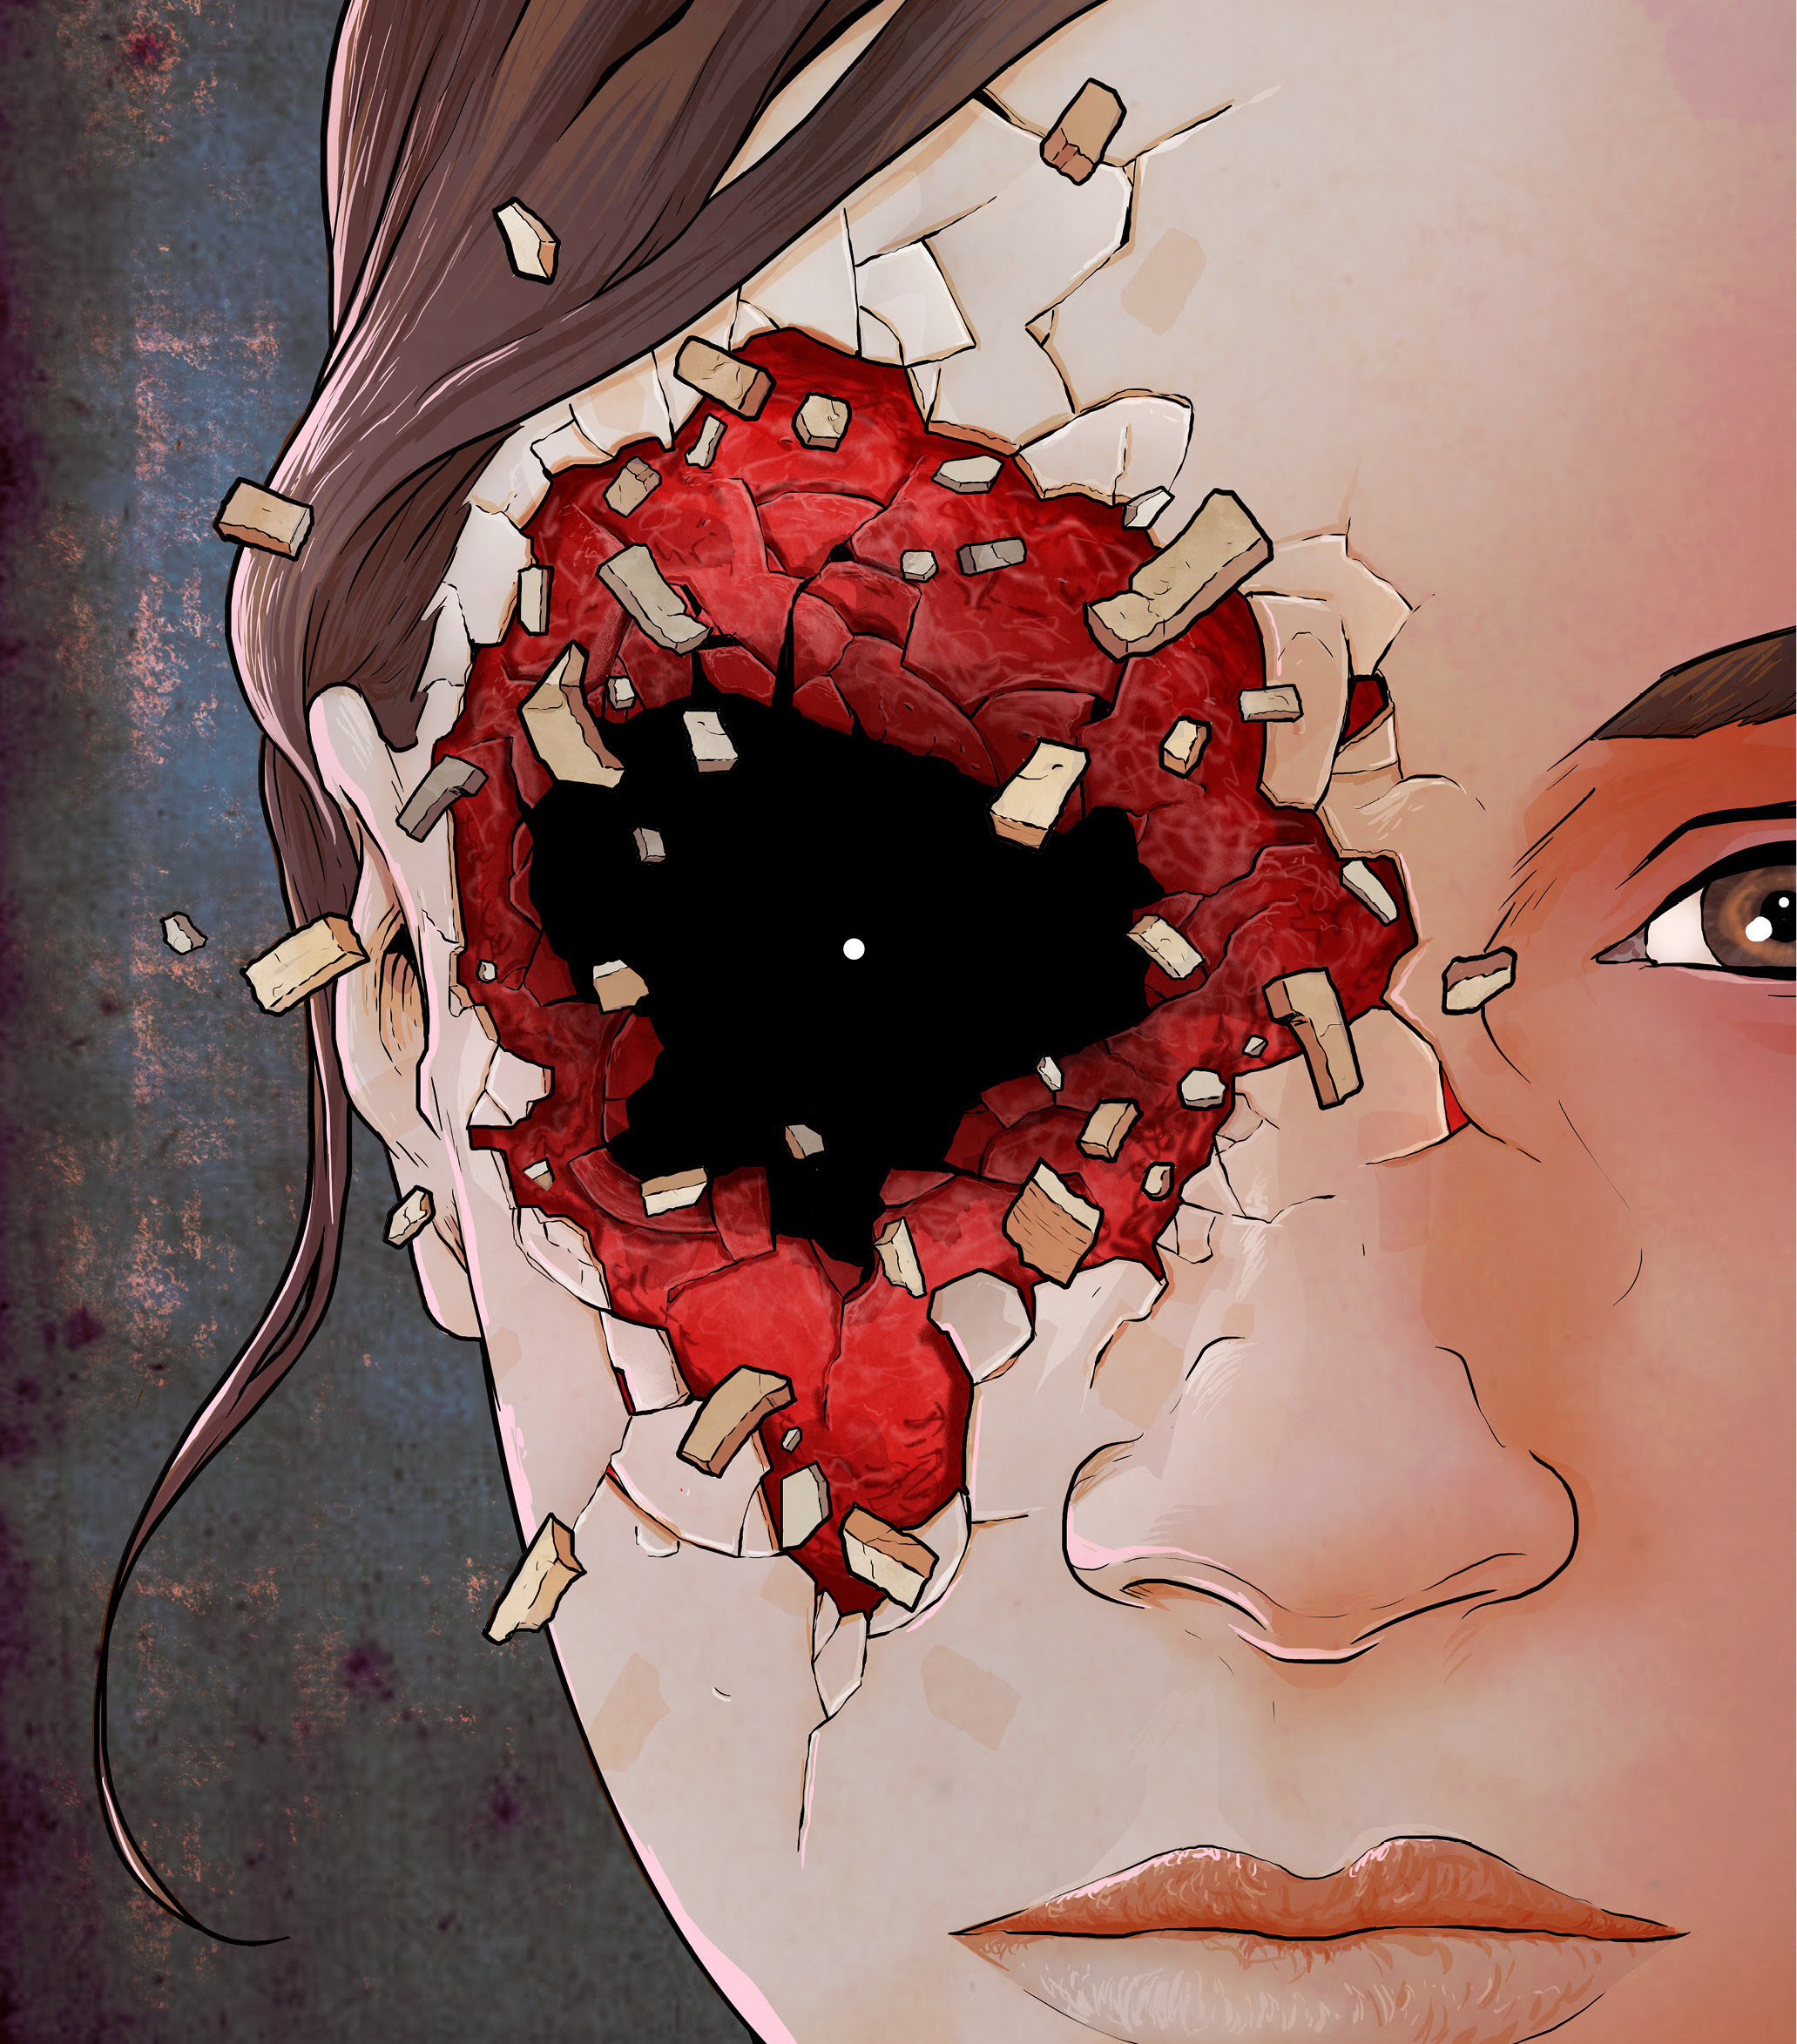 BOOM! Preview: The Red Mother #1